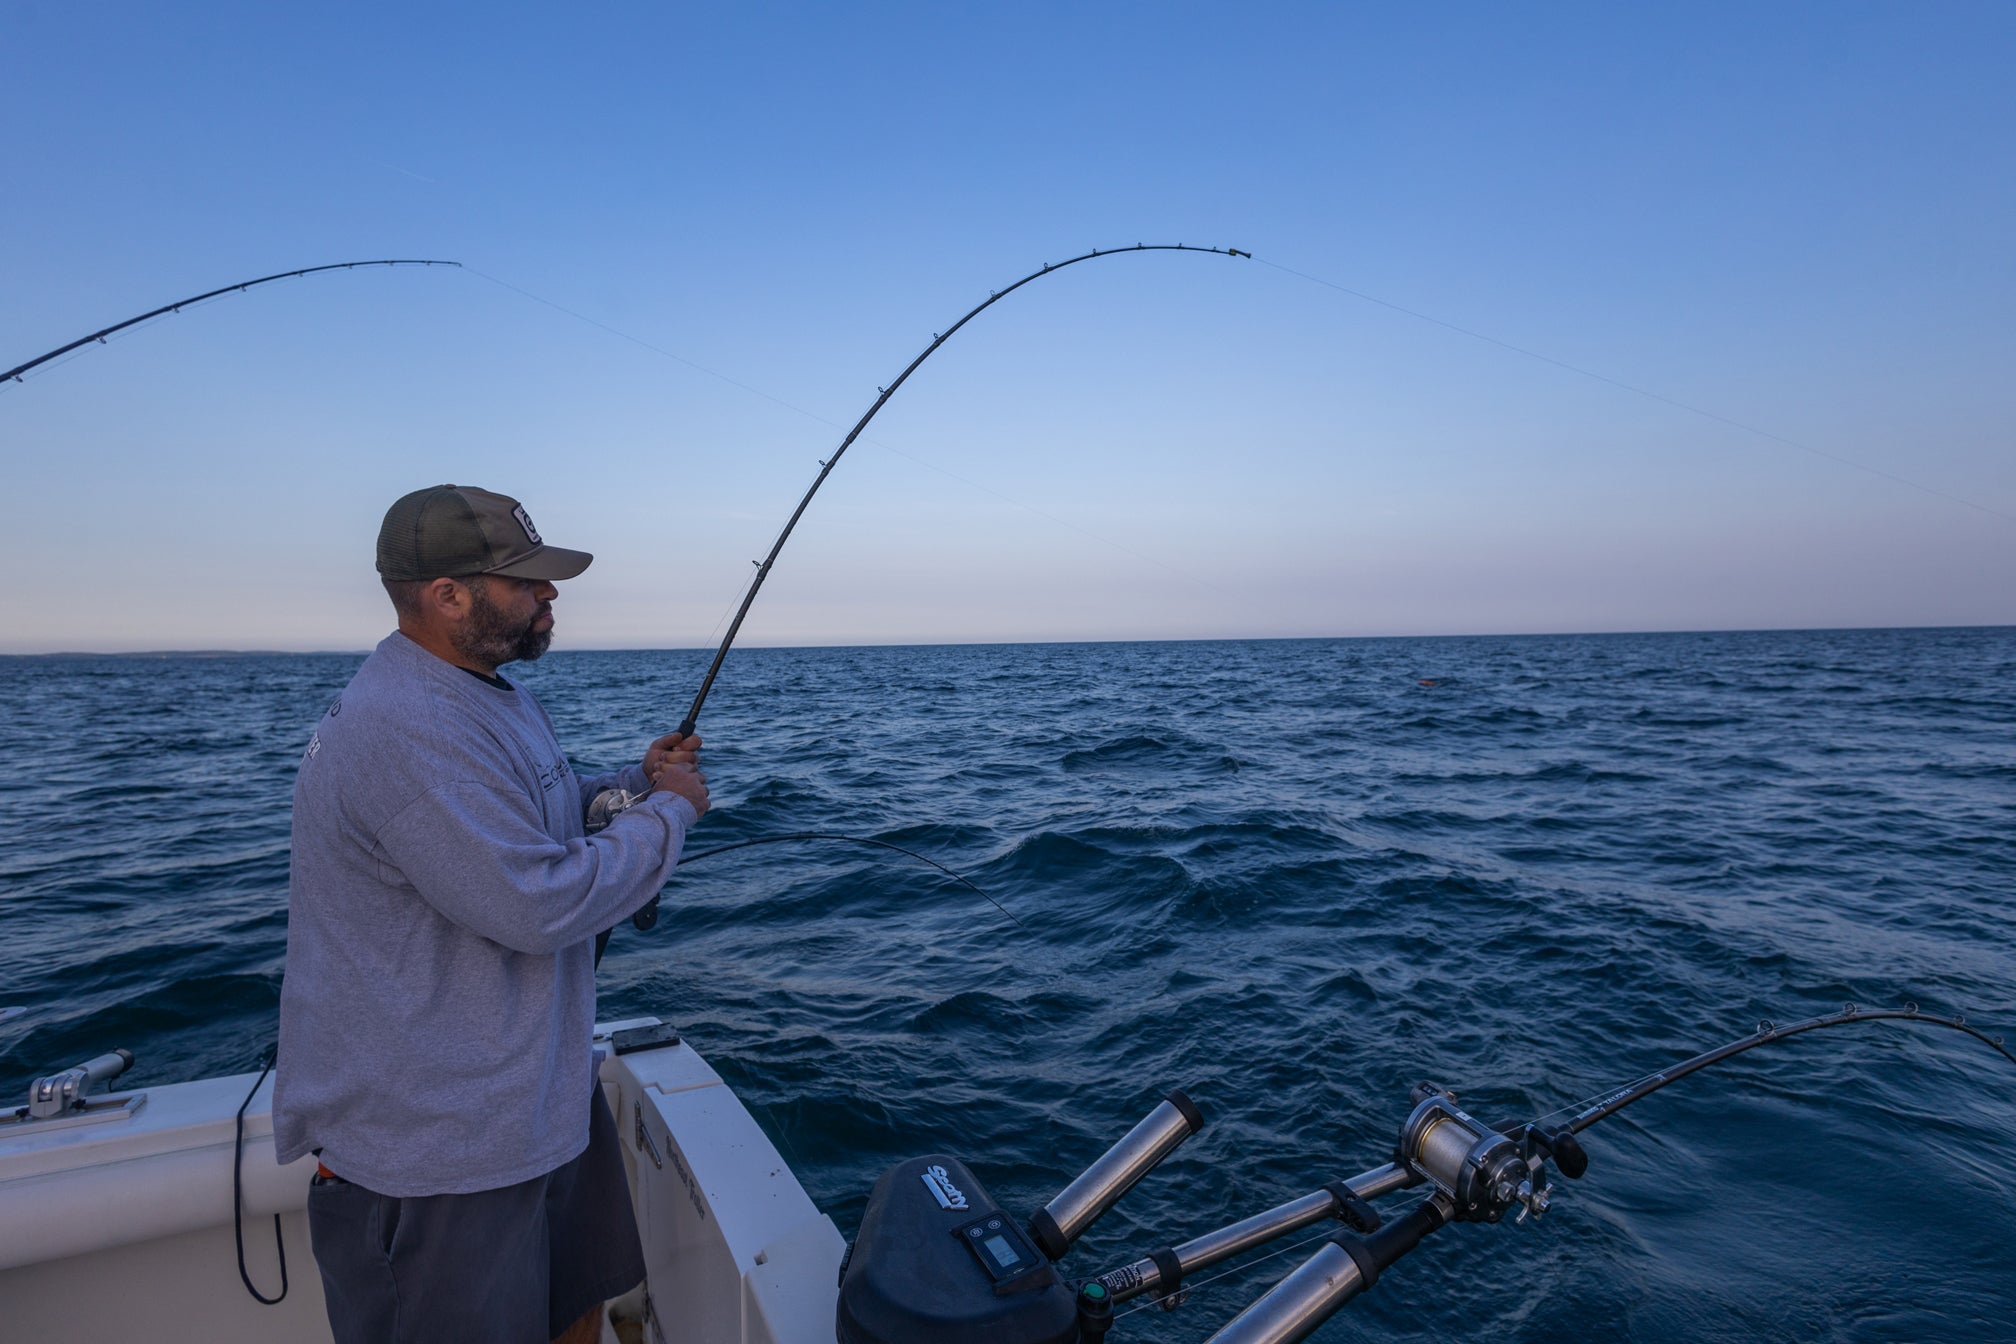 A man standing on a boat and holding onto his fly fishing rod. There is another fly rod that is behind held in a holder